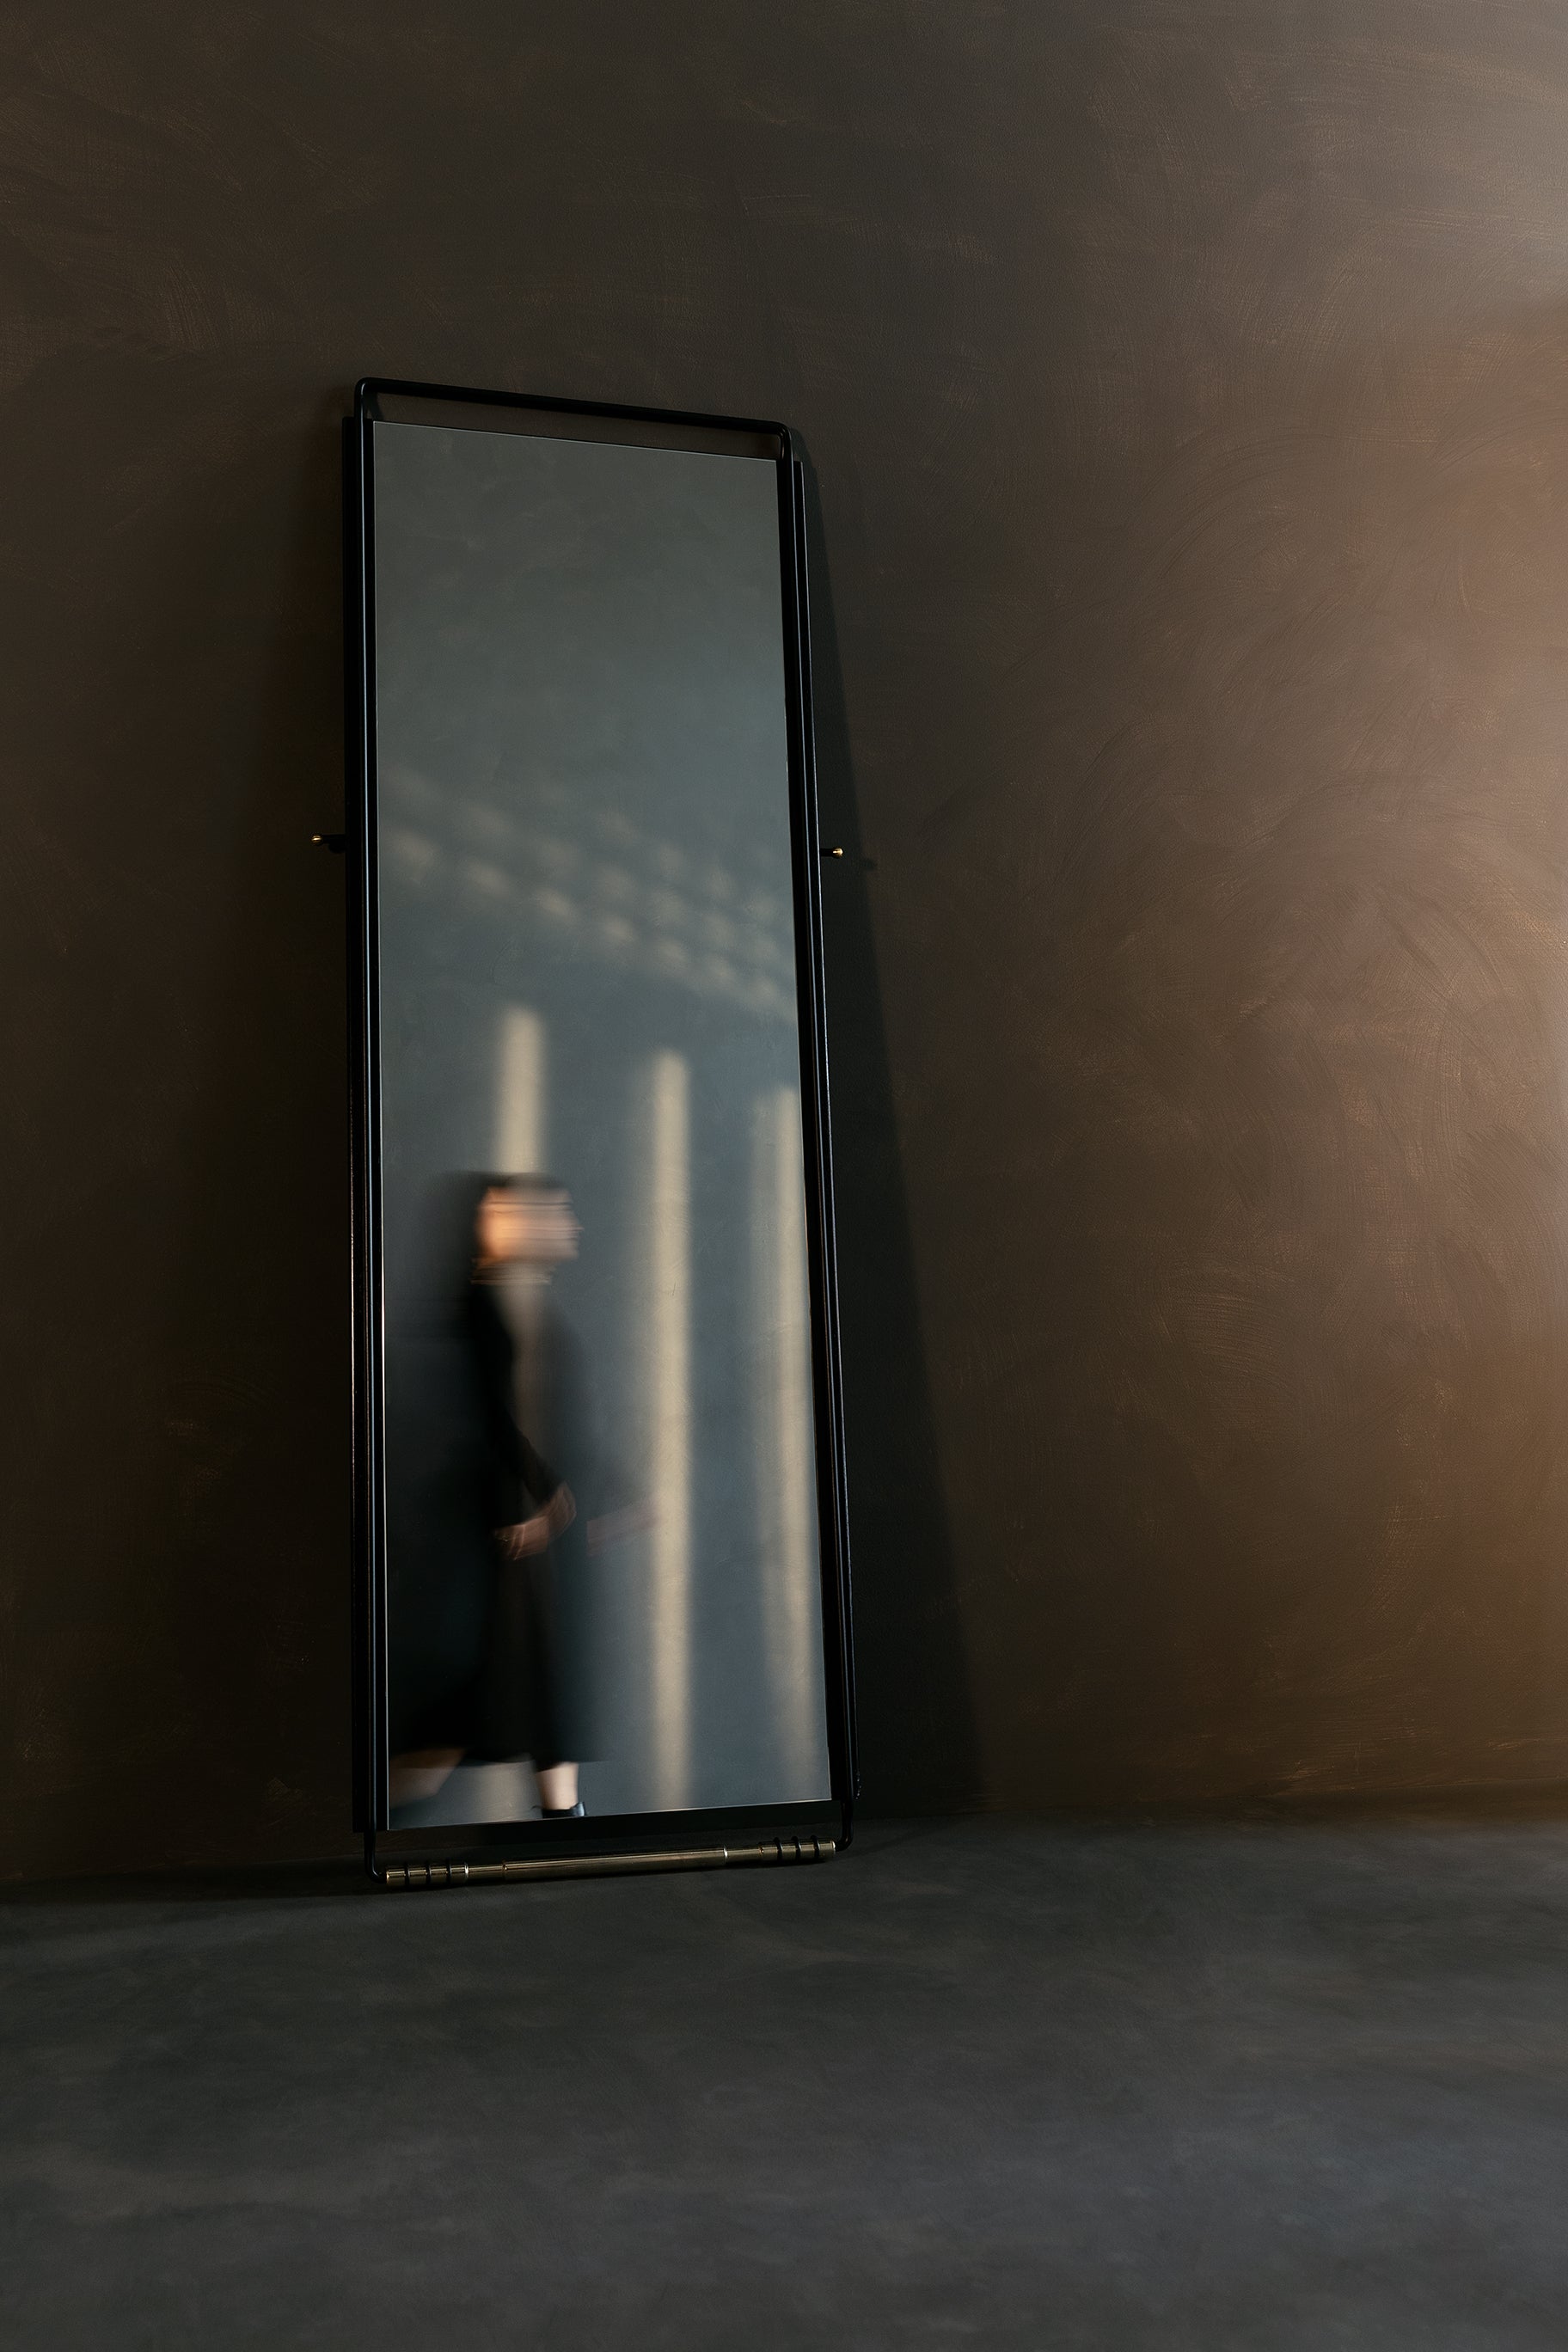 Floor mirror by Estudio Andean
Dimensions: W 60 x D 4 x H 180 cm
Materials: steel, wood, bronze.

Floor mirror made of steel rod frame and solid seike wood with a natural oil finish, lathed bronze base and hardware.

ALEJANDRO MOYANO
FOUNDER